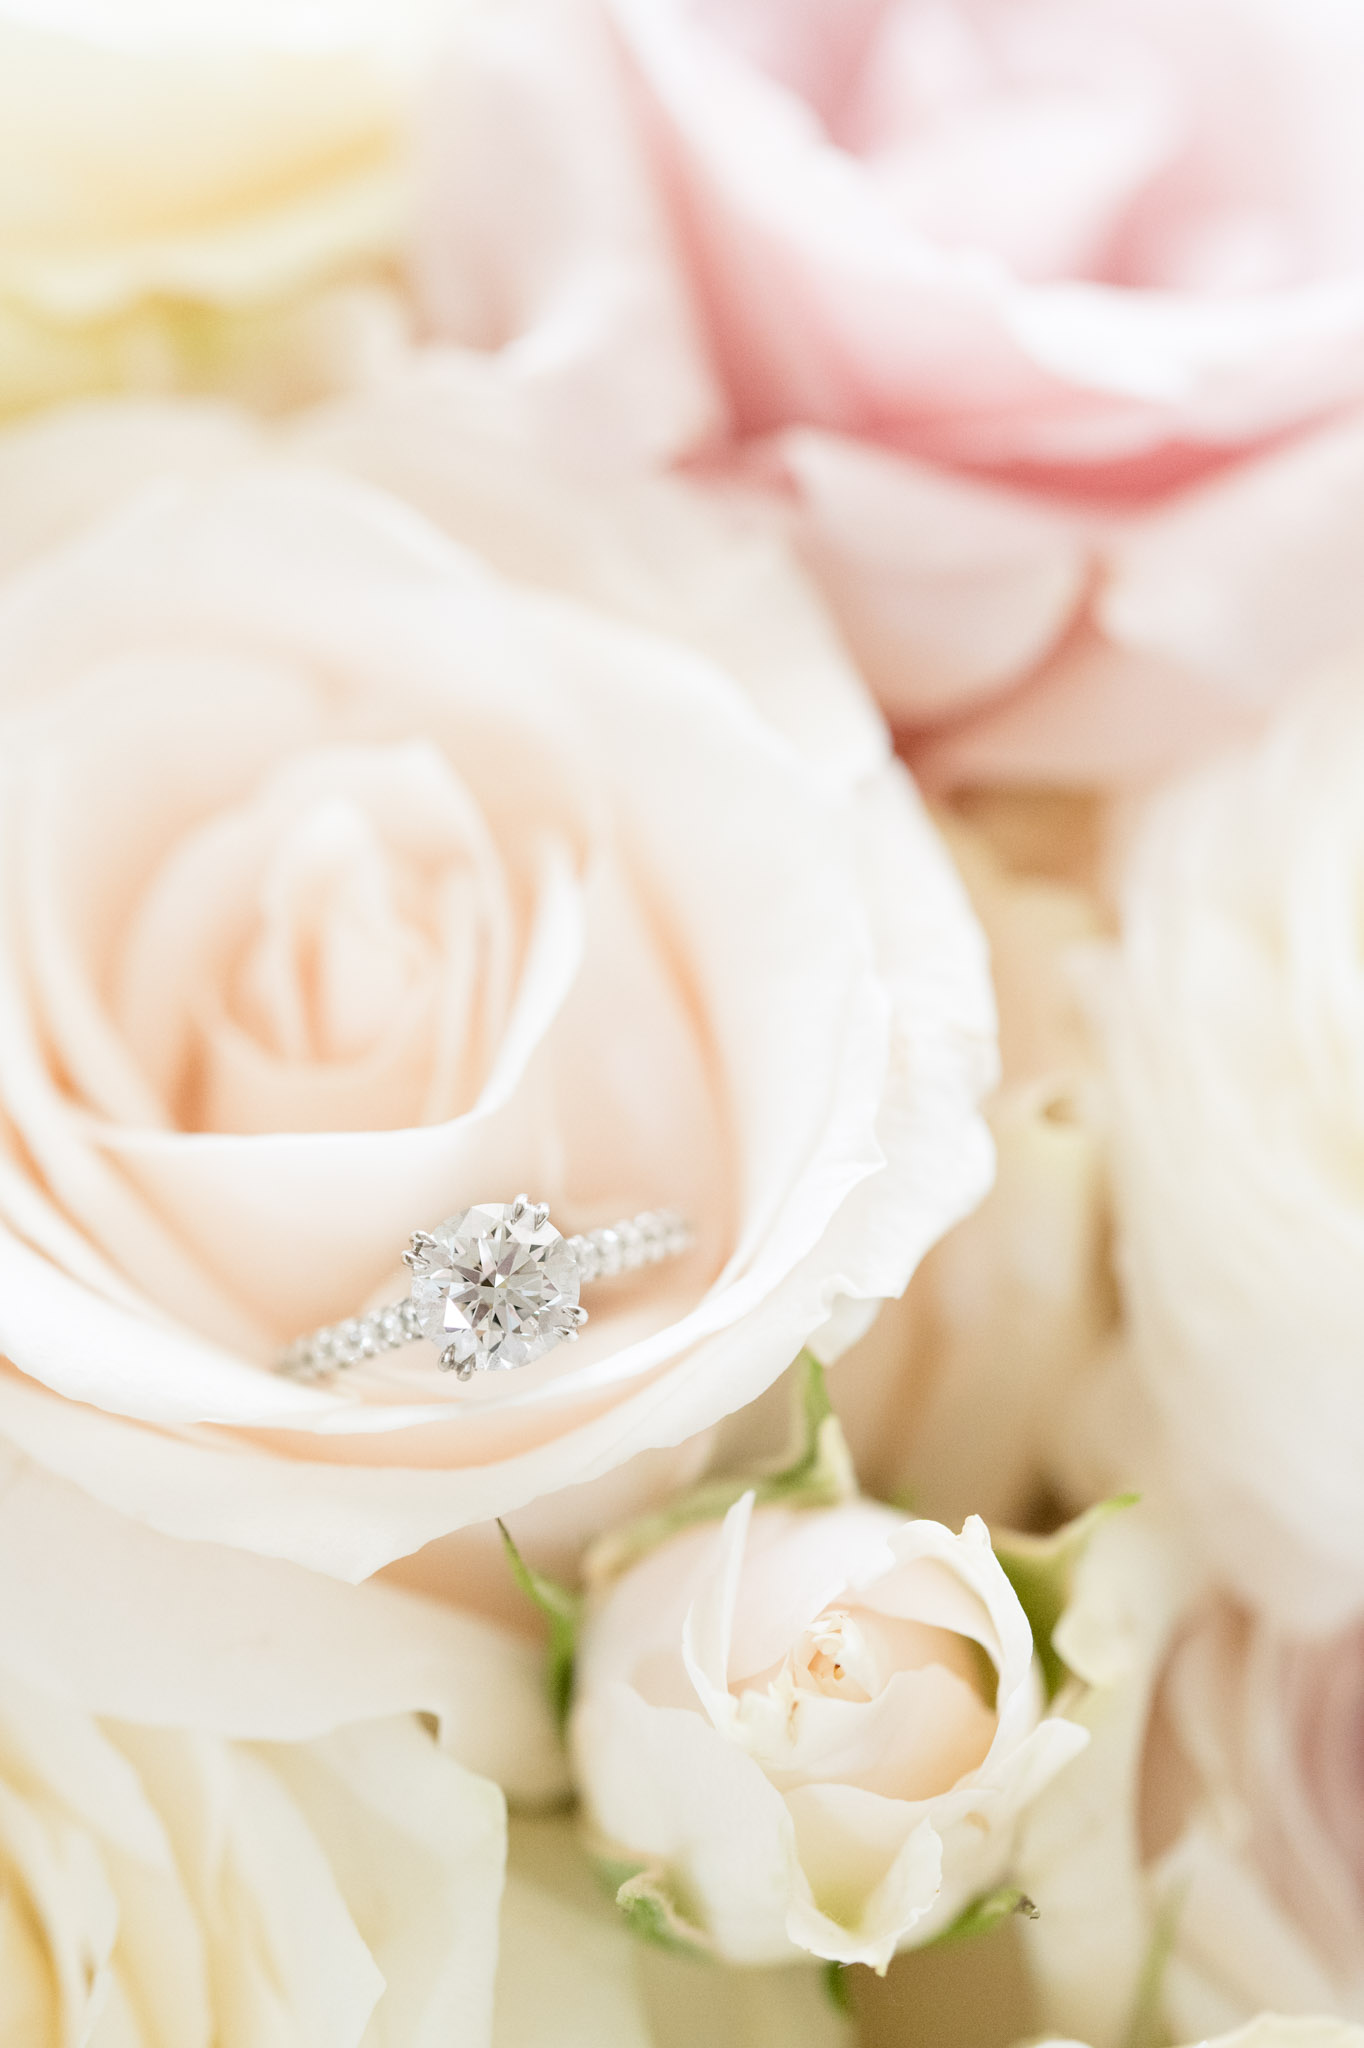 Engagement ring sits in pink rose.